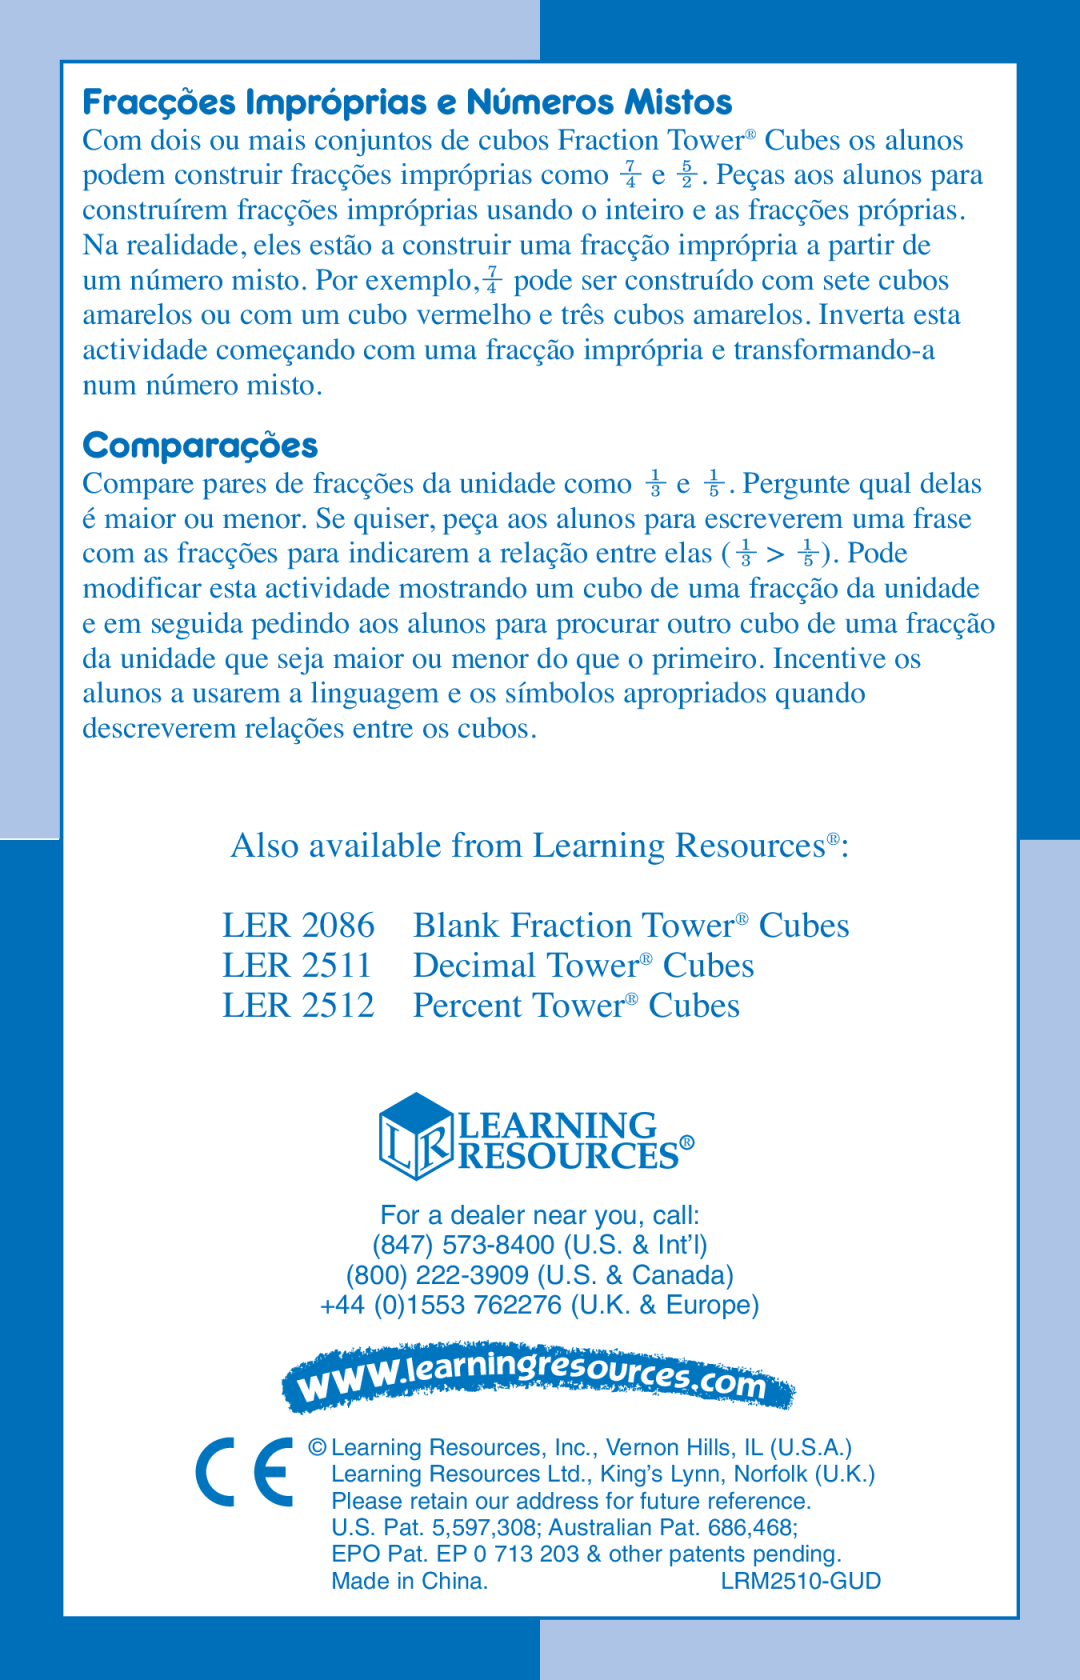 Learning Resources LER 2510 manual Also available from Learning Resources, LER 2512 Percent Tower Cubes 